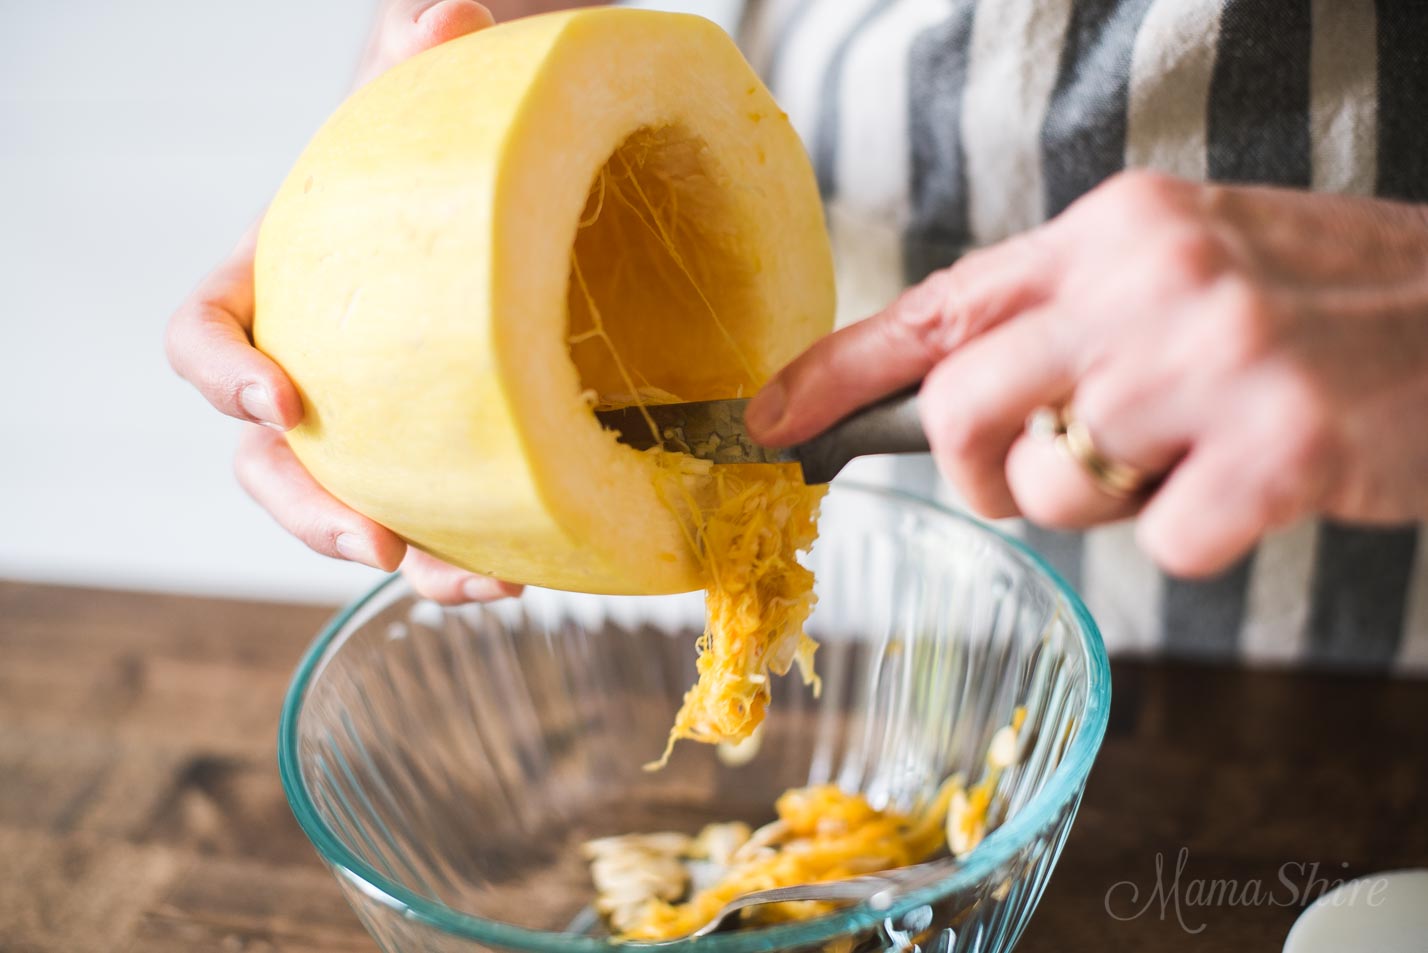 How to Cut and Cook a Spaghetti Squash